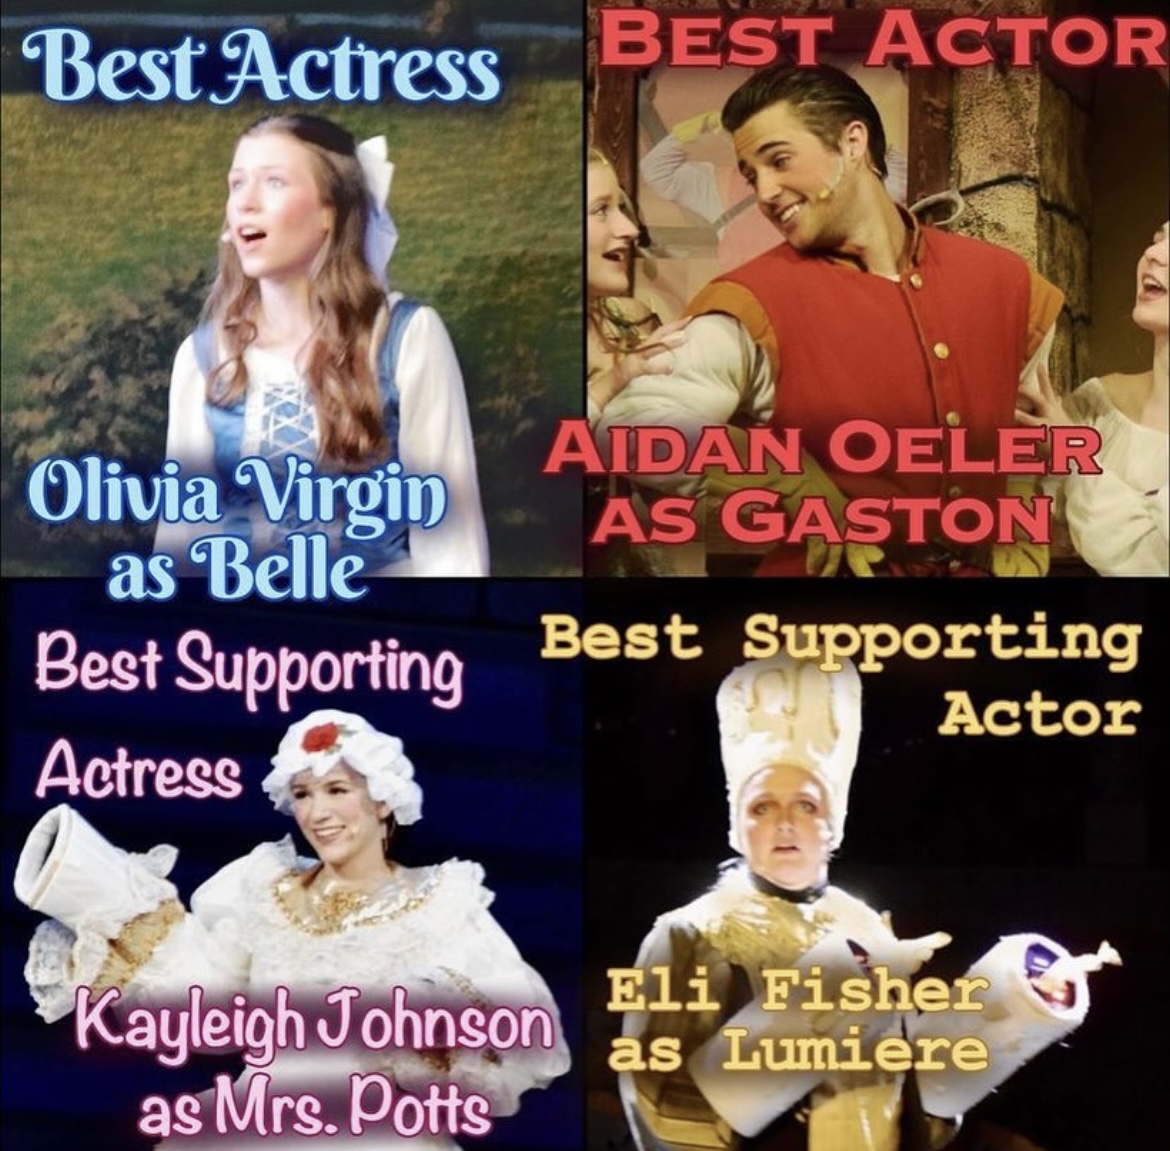 Kudos to @TJHSJaguars actor & actress Semifinalists from 'Beauty and the Beast' for @GKAwards for Excellence in High School Musical Theater!
The finalists for all awards will be announced Wed, 5/8 at 9 am during KDKA's @PGHTodayLive . #WJHSD @phmsjaguars  (Graphic by @TJDramaITS)